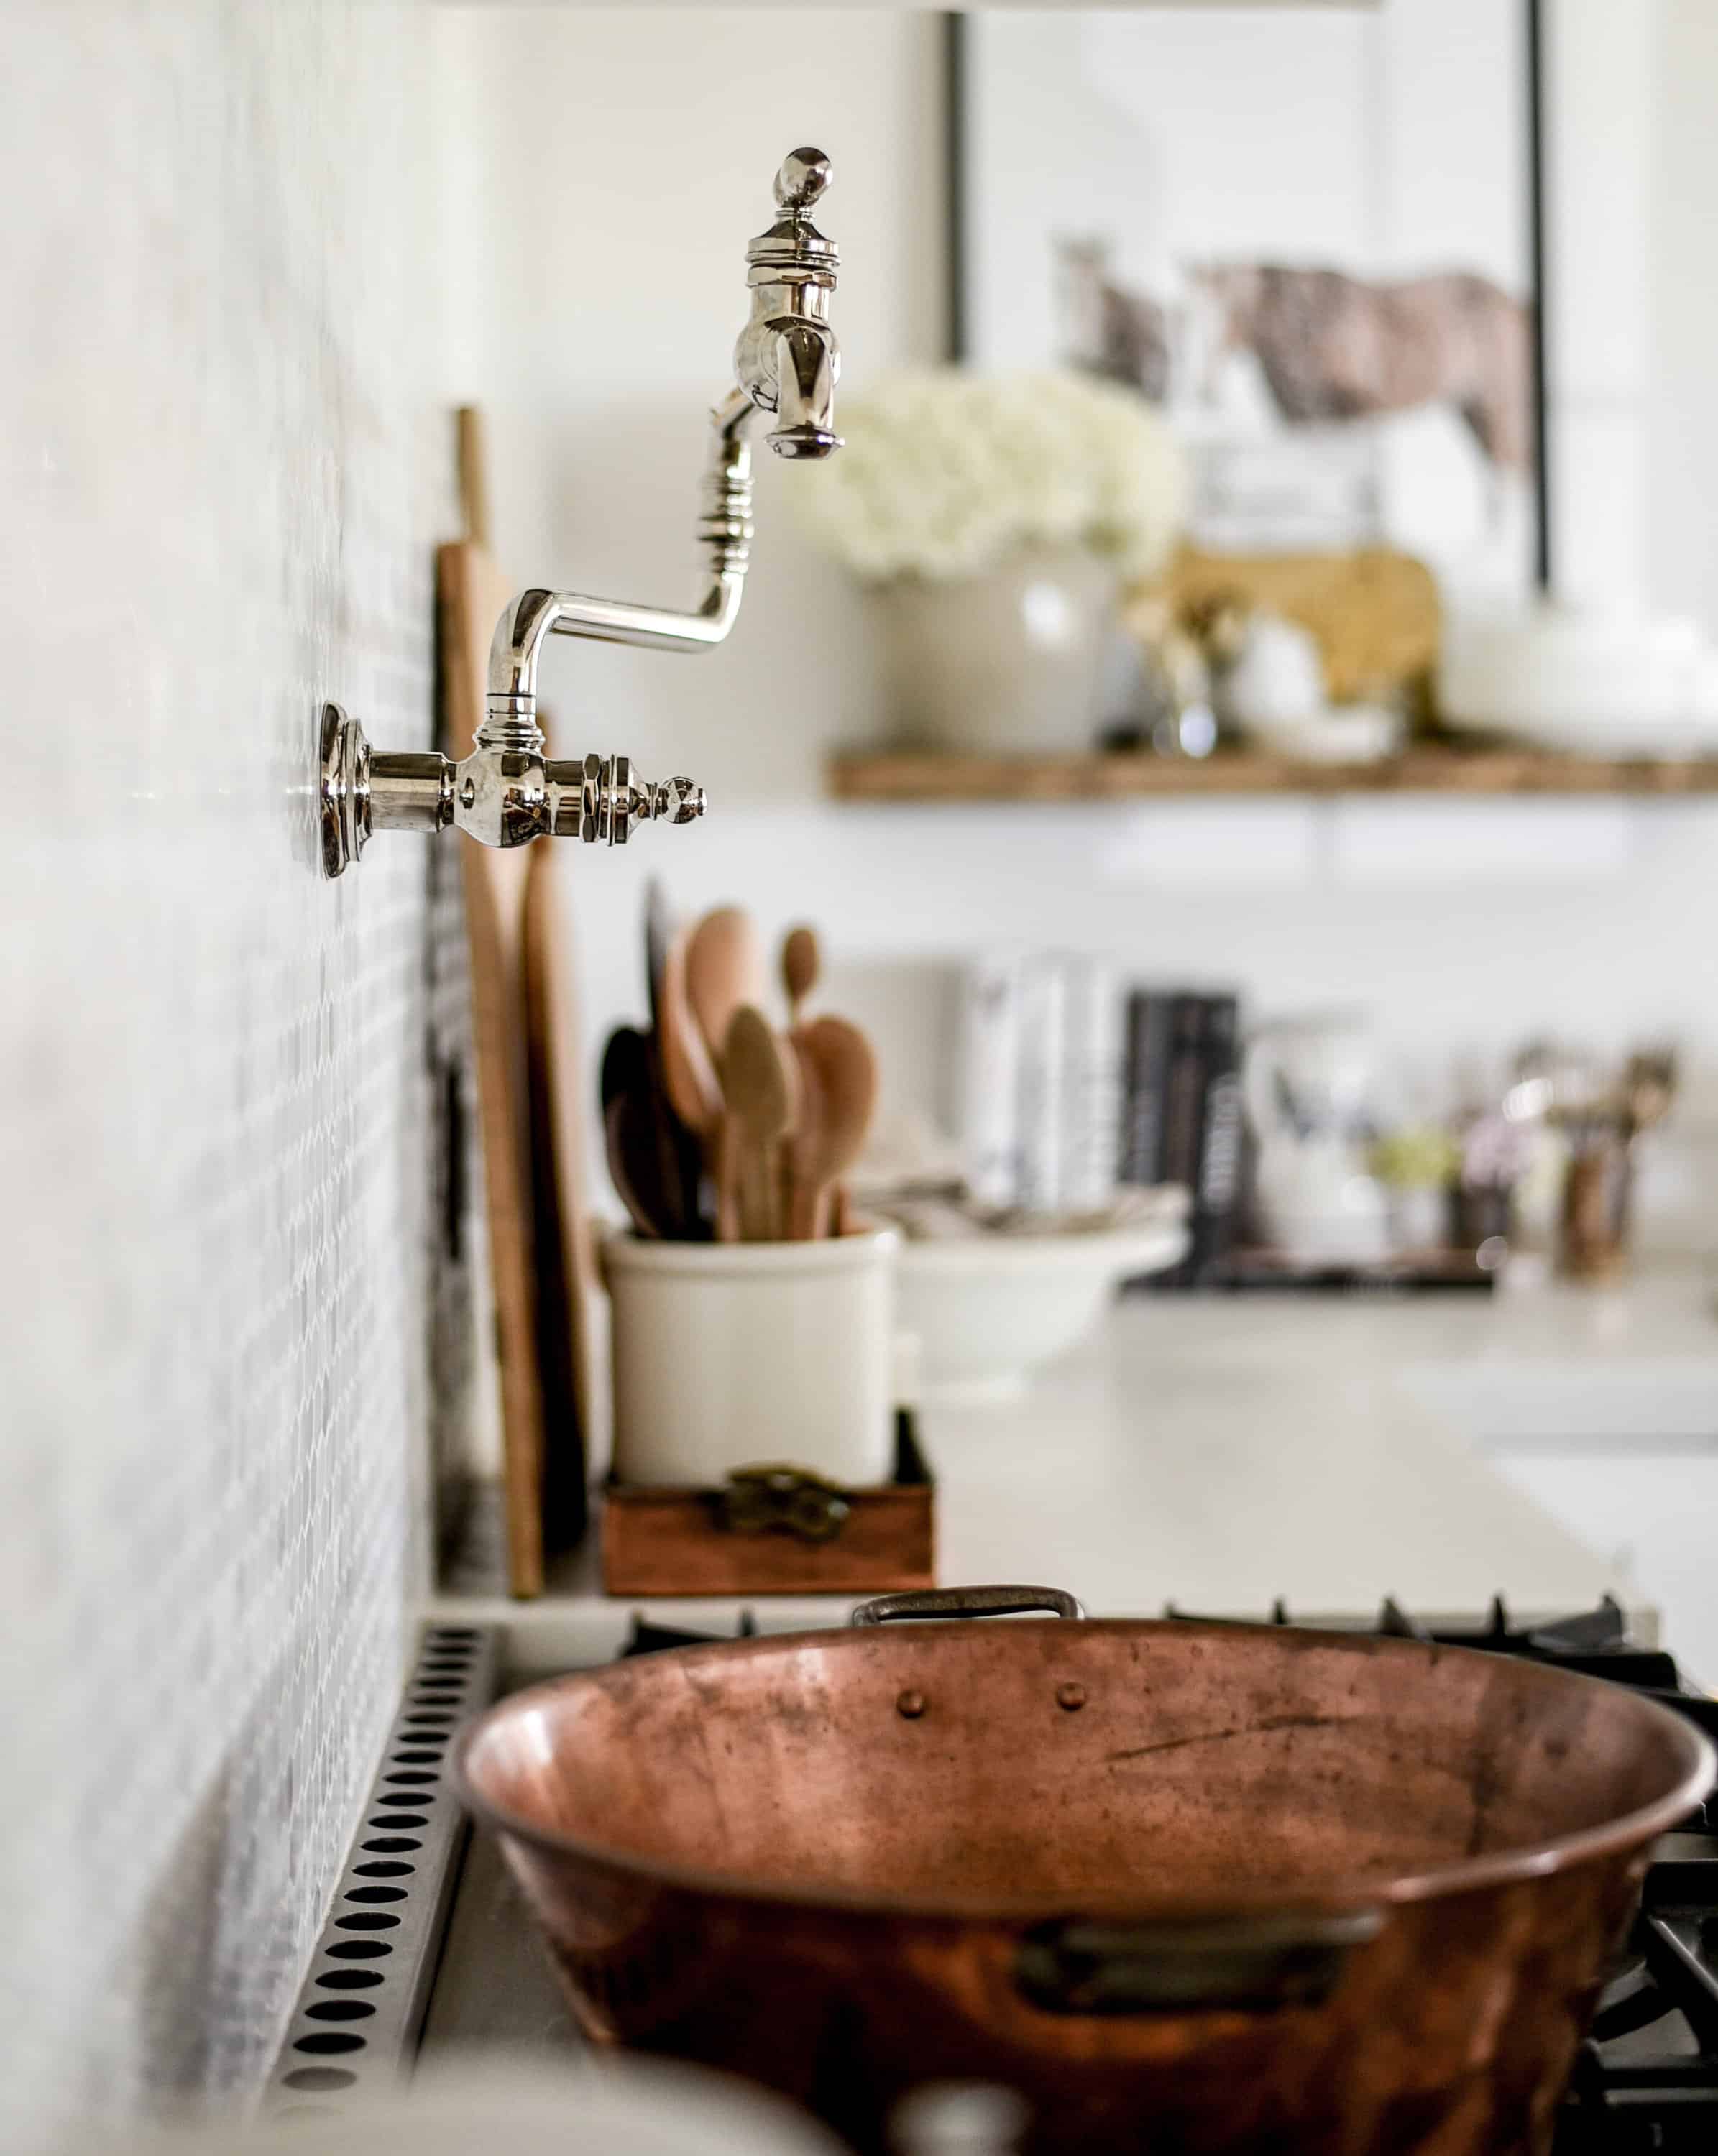 I mentioned that when we began remodeling, someone from the Kohler team reached out to see if I might be interested in collaborating with them in our kitchen. Since I had already fallen in love with their extra wide, extra deep apron front sink, I was happy to jump on board to create our farmhouse kitchen with their designs. 